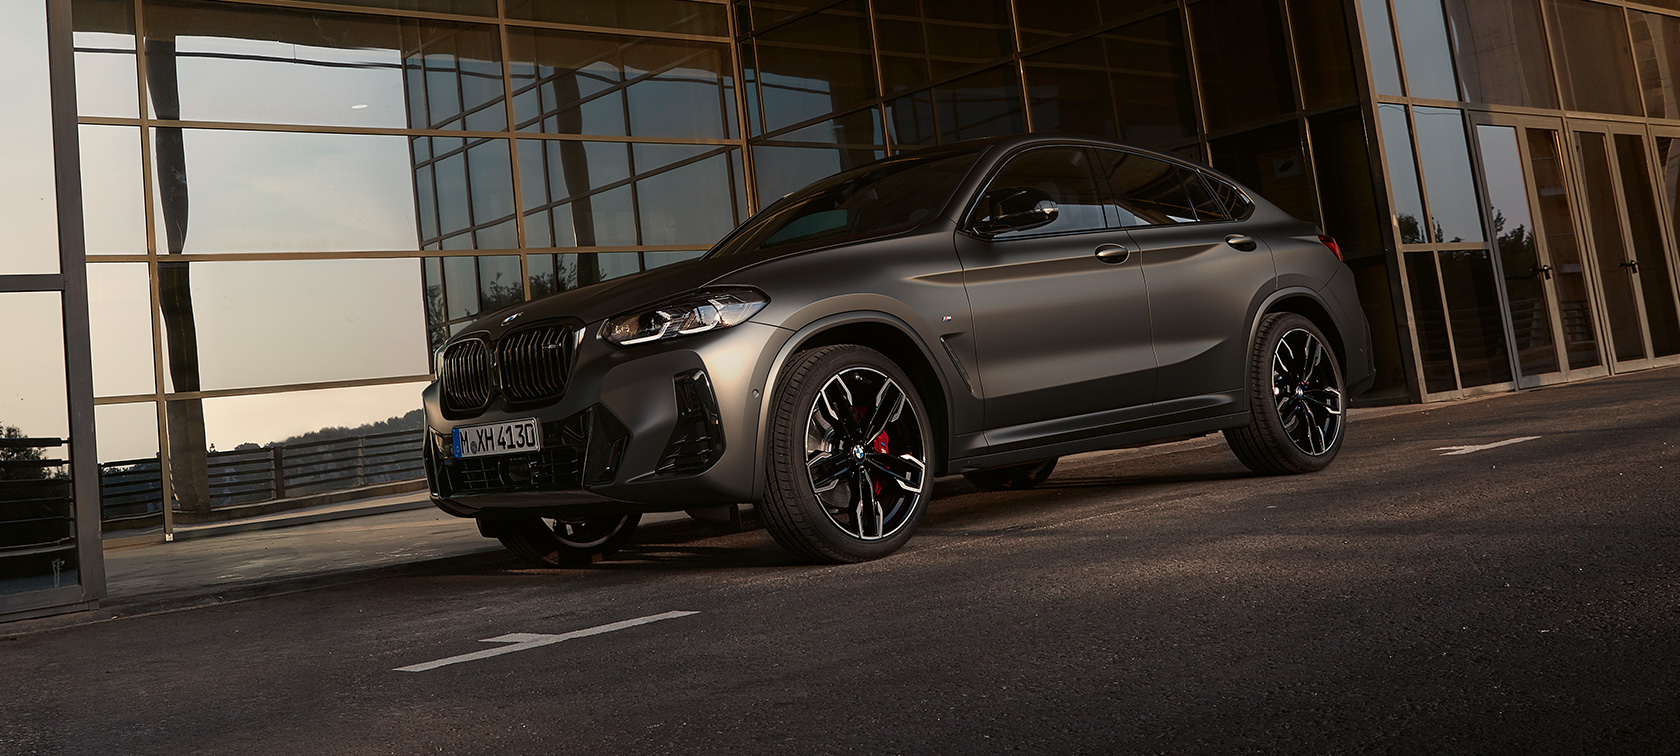 BMW X4 M40i G02 LCI 2021 Facelift three-quarter front view in front of glass facade